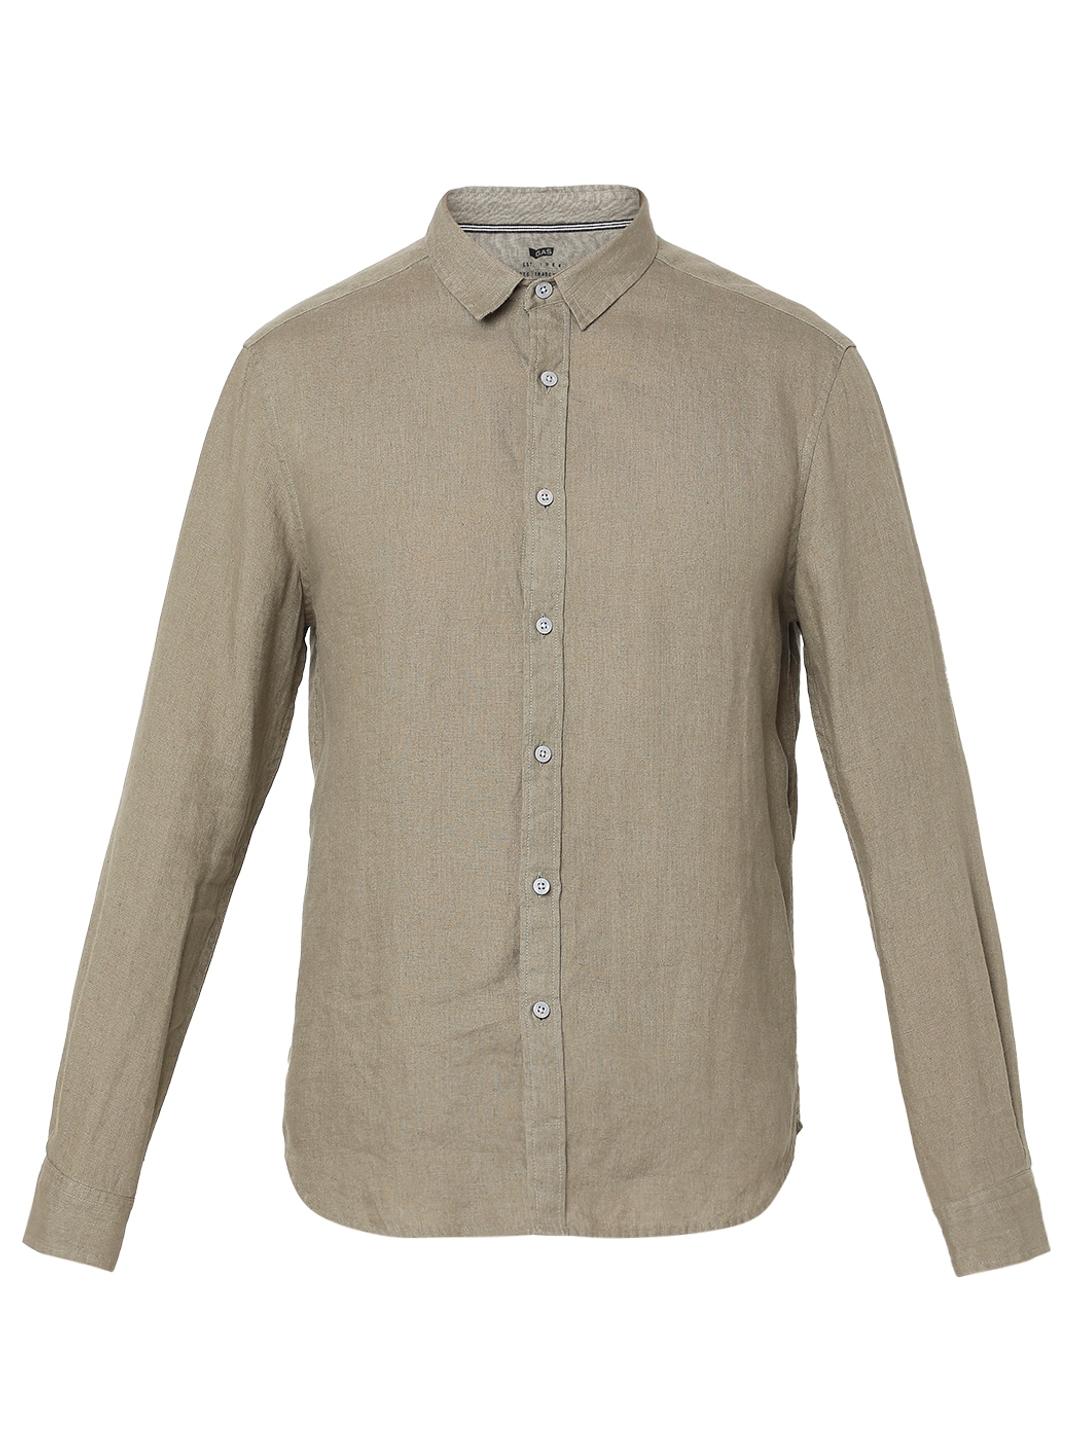 Regular Fit Solid Full Sleeve Shirt with Classic Collar